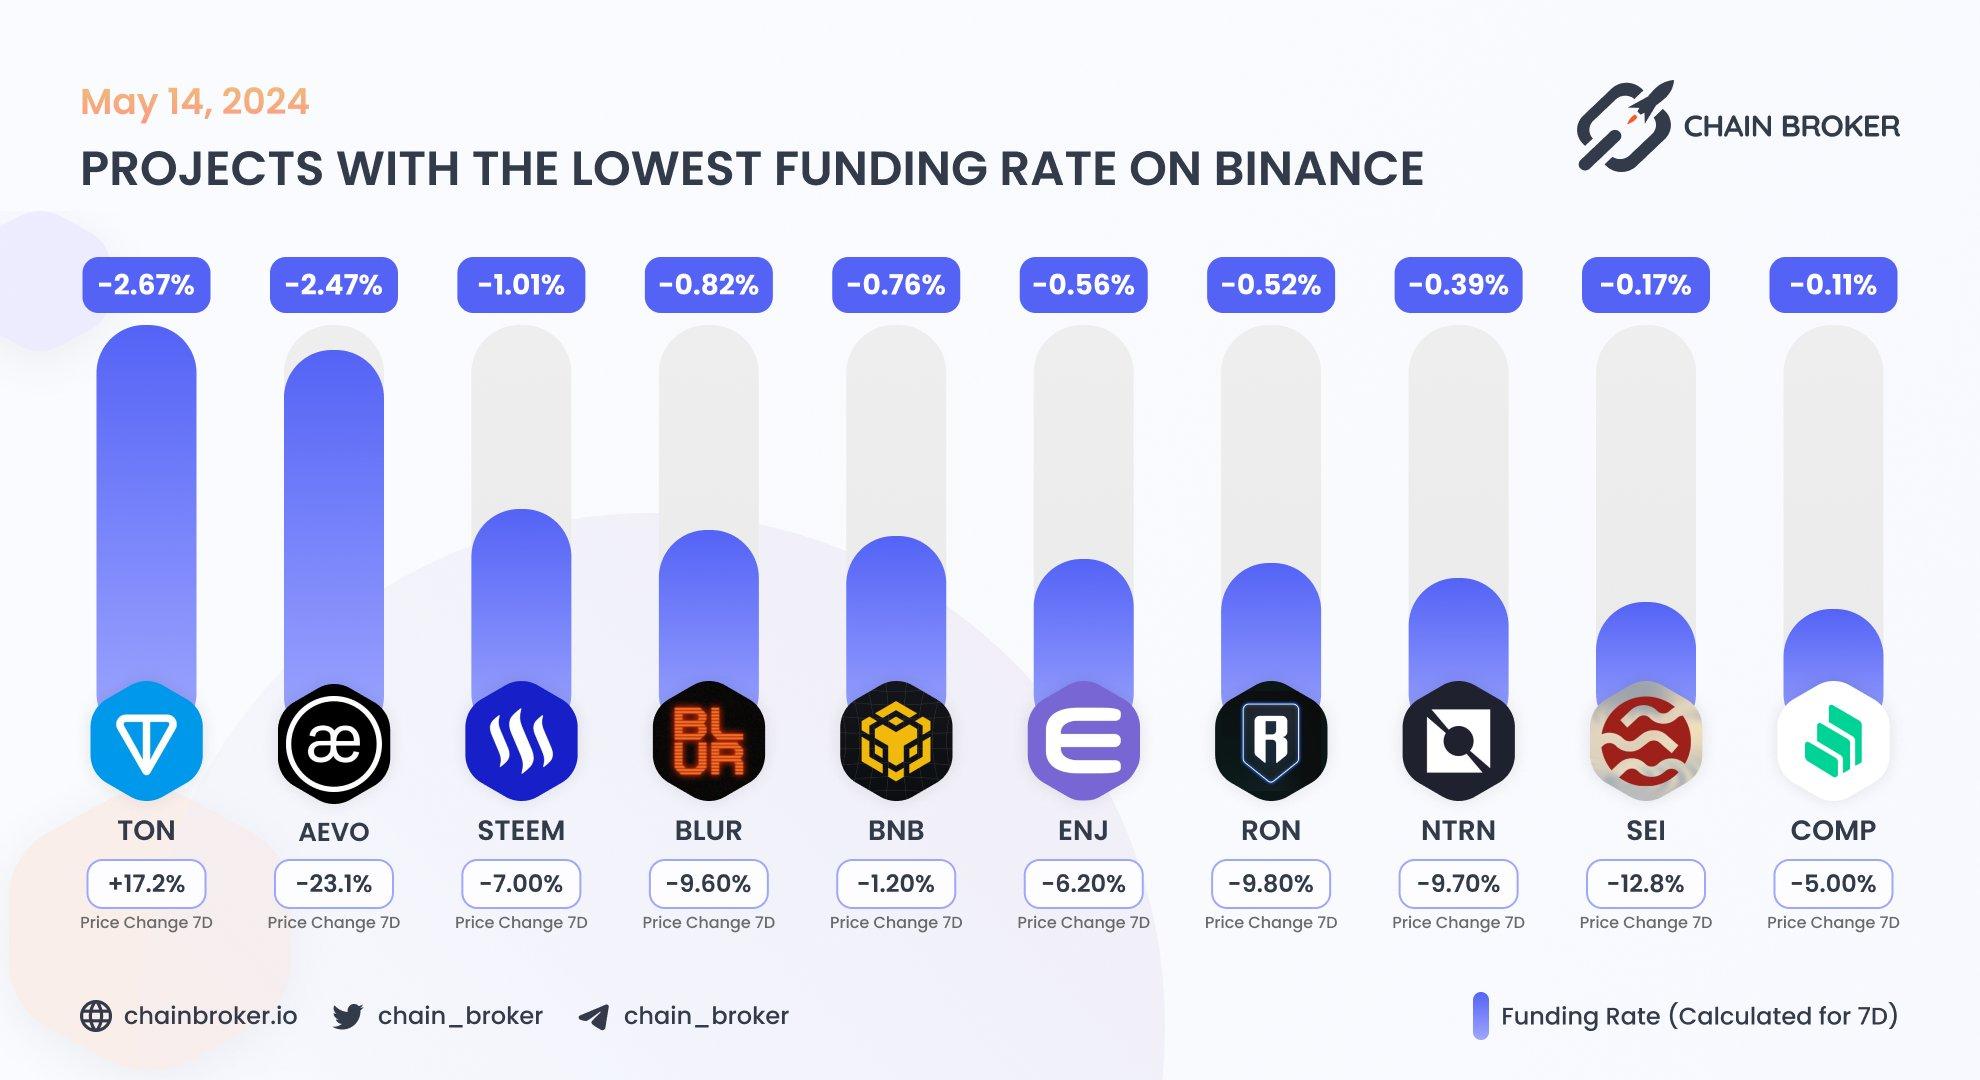 Top projects with the lowest funding rate